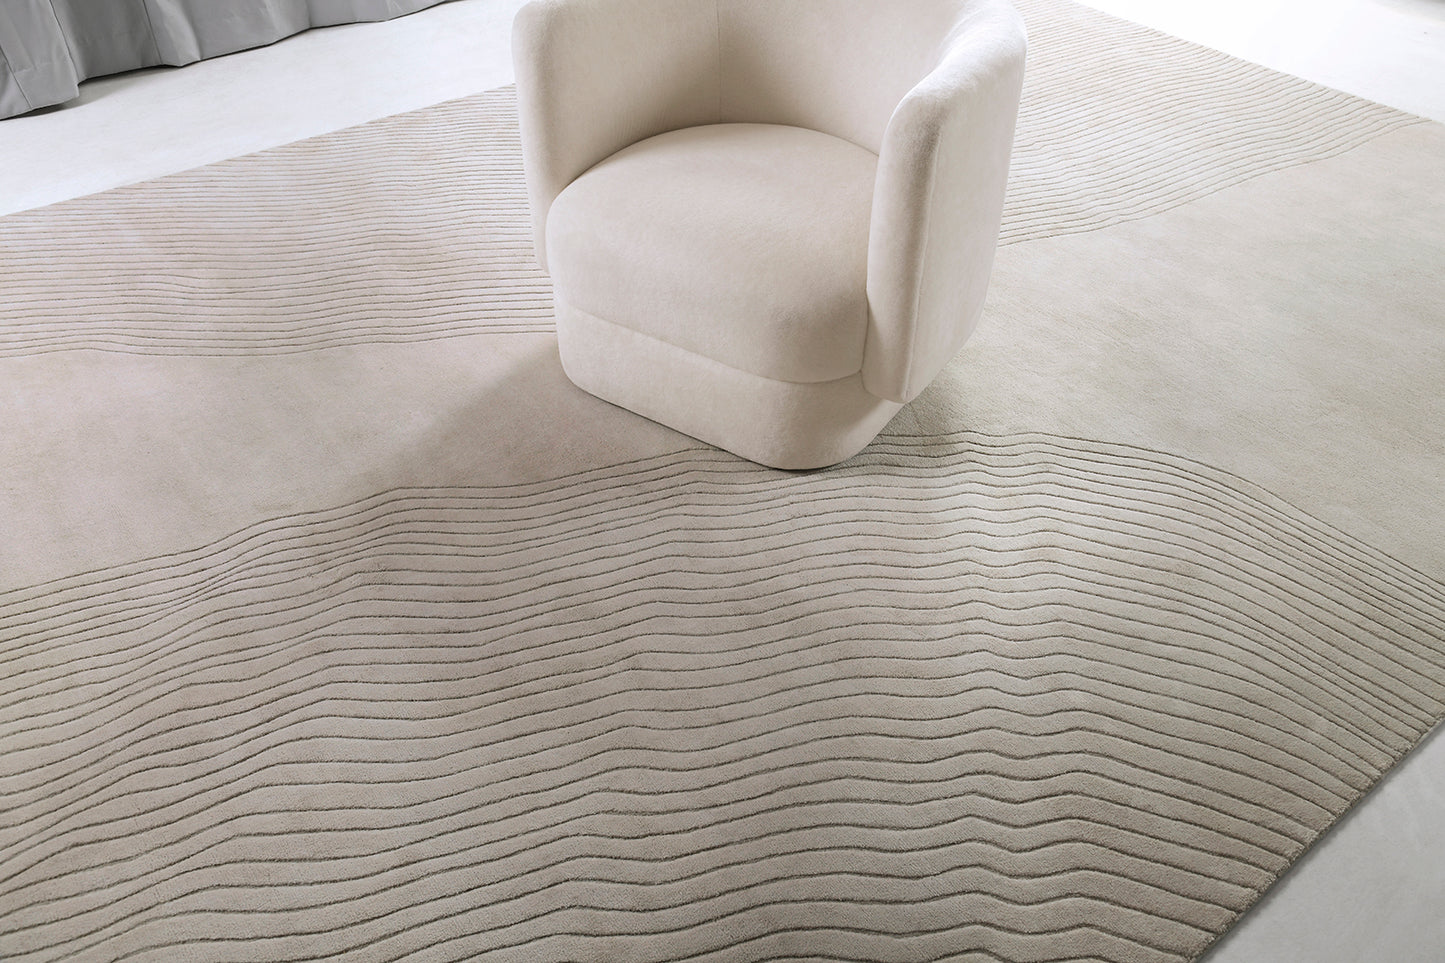 Modern Rug Image 9753 Sands by Claudia Afshar